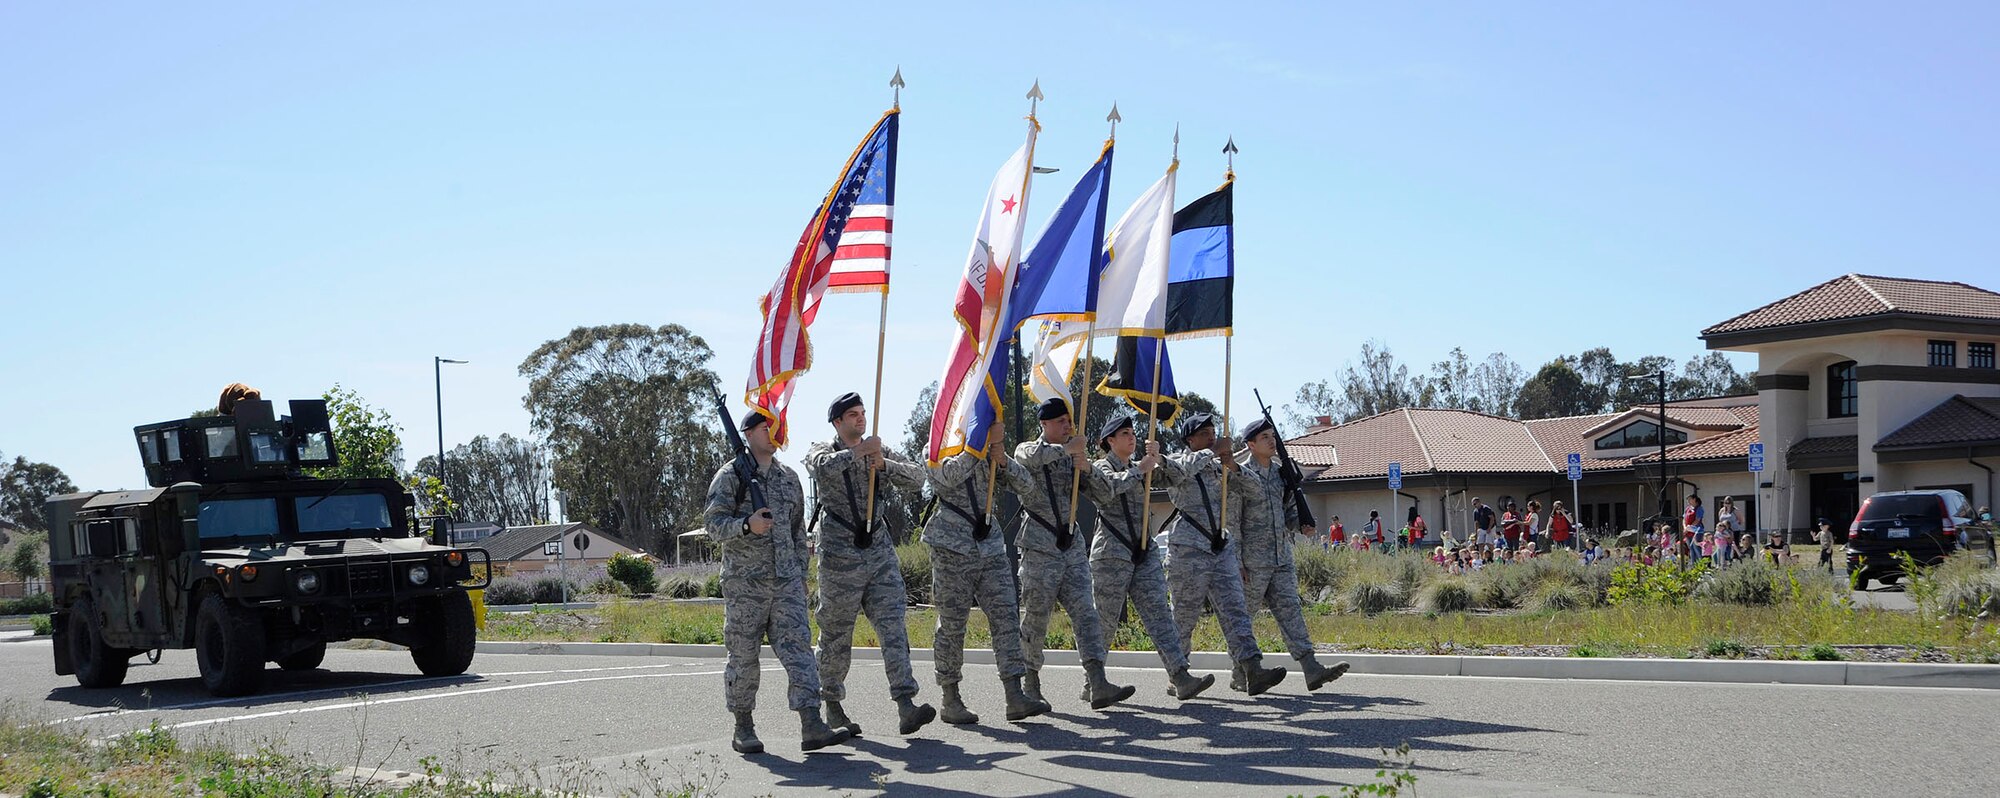 Members of the 30th Security Forces Squadron participated a parade on the afternoon of May 12 in honor of National Police Week. (U.S. Air Force photo by/Staff Sgt. Erica Picariello)